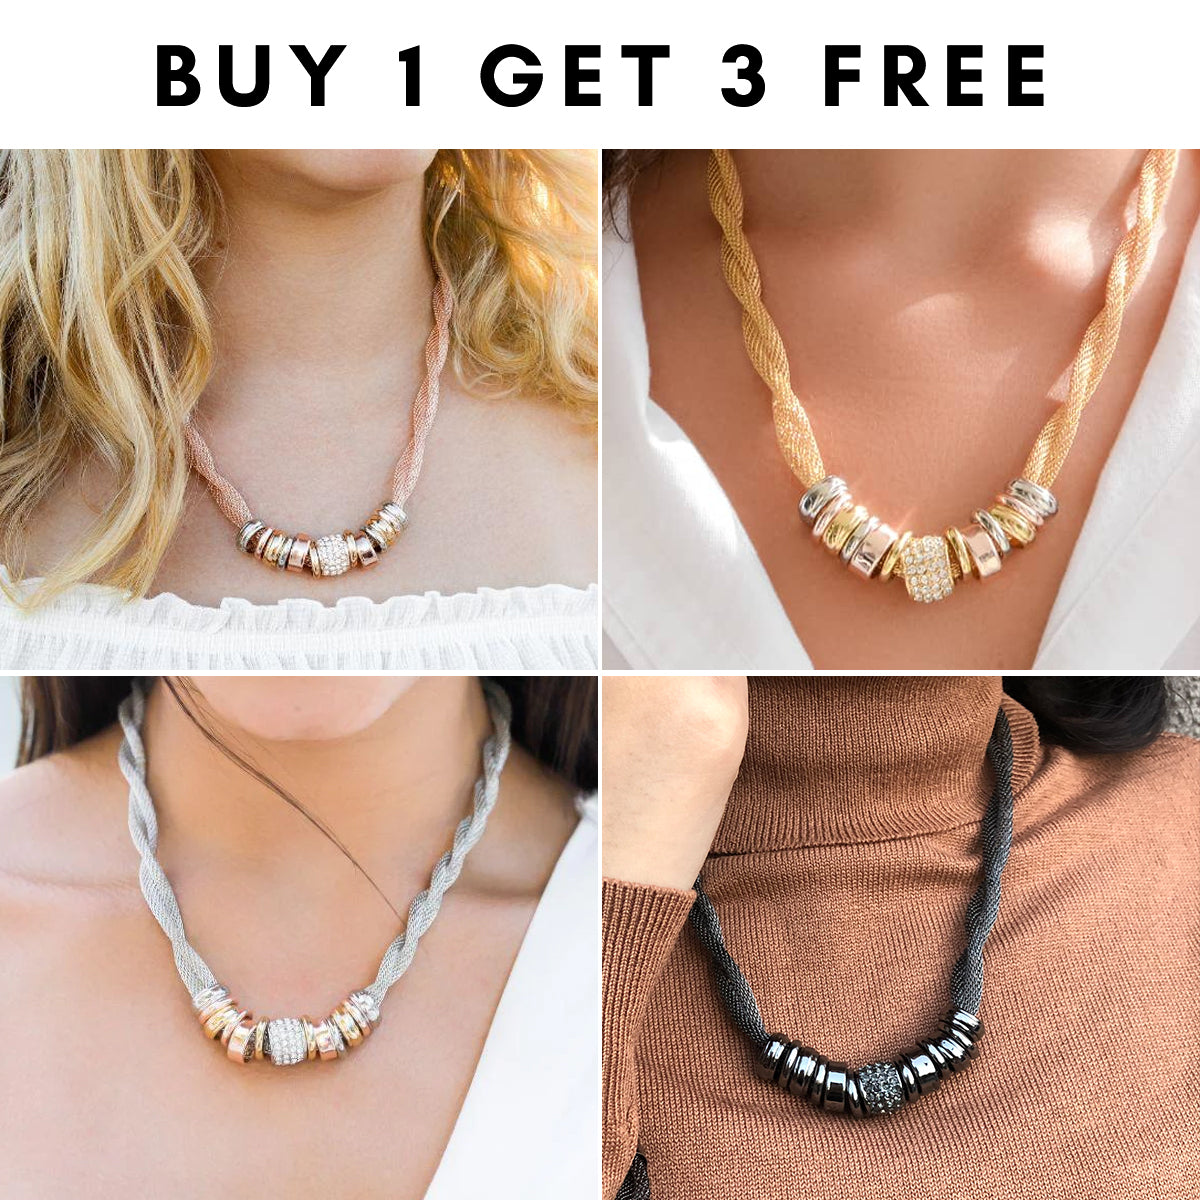 BUY 1 GET 3 FREE - Entwined Metal Necklaces